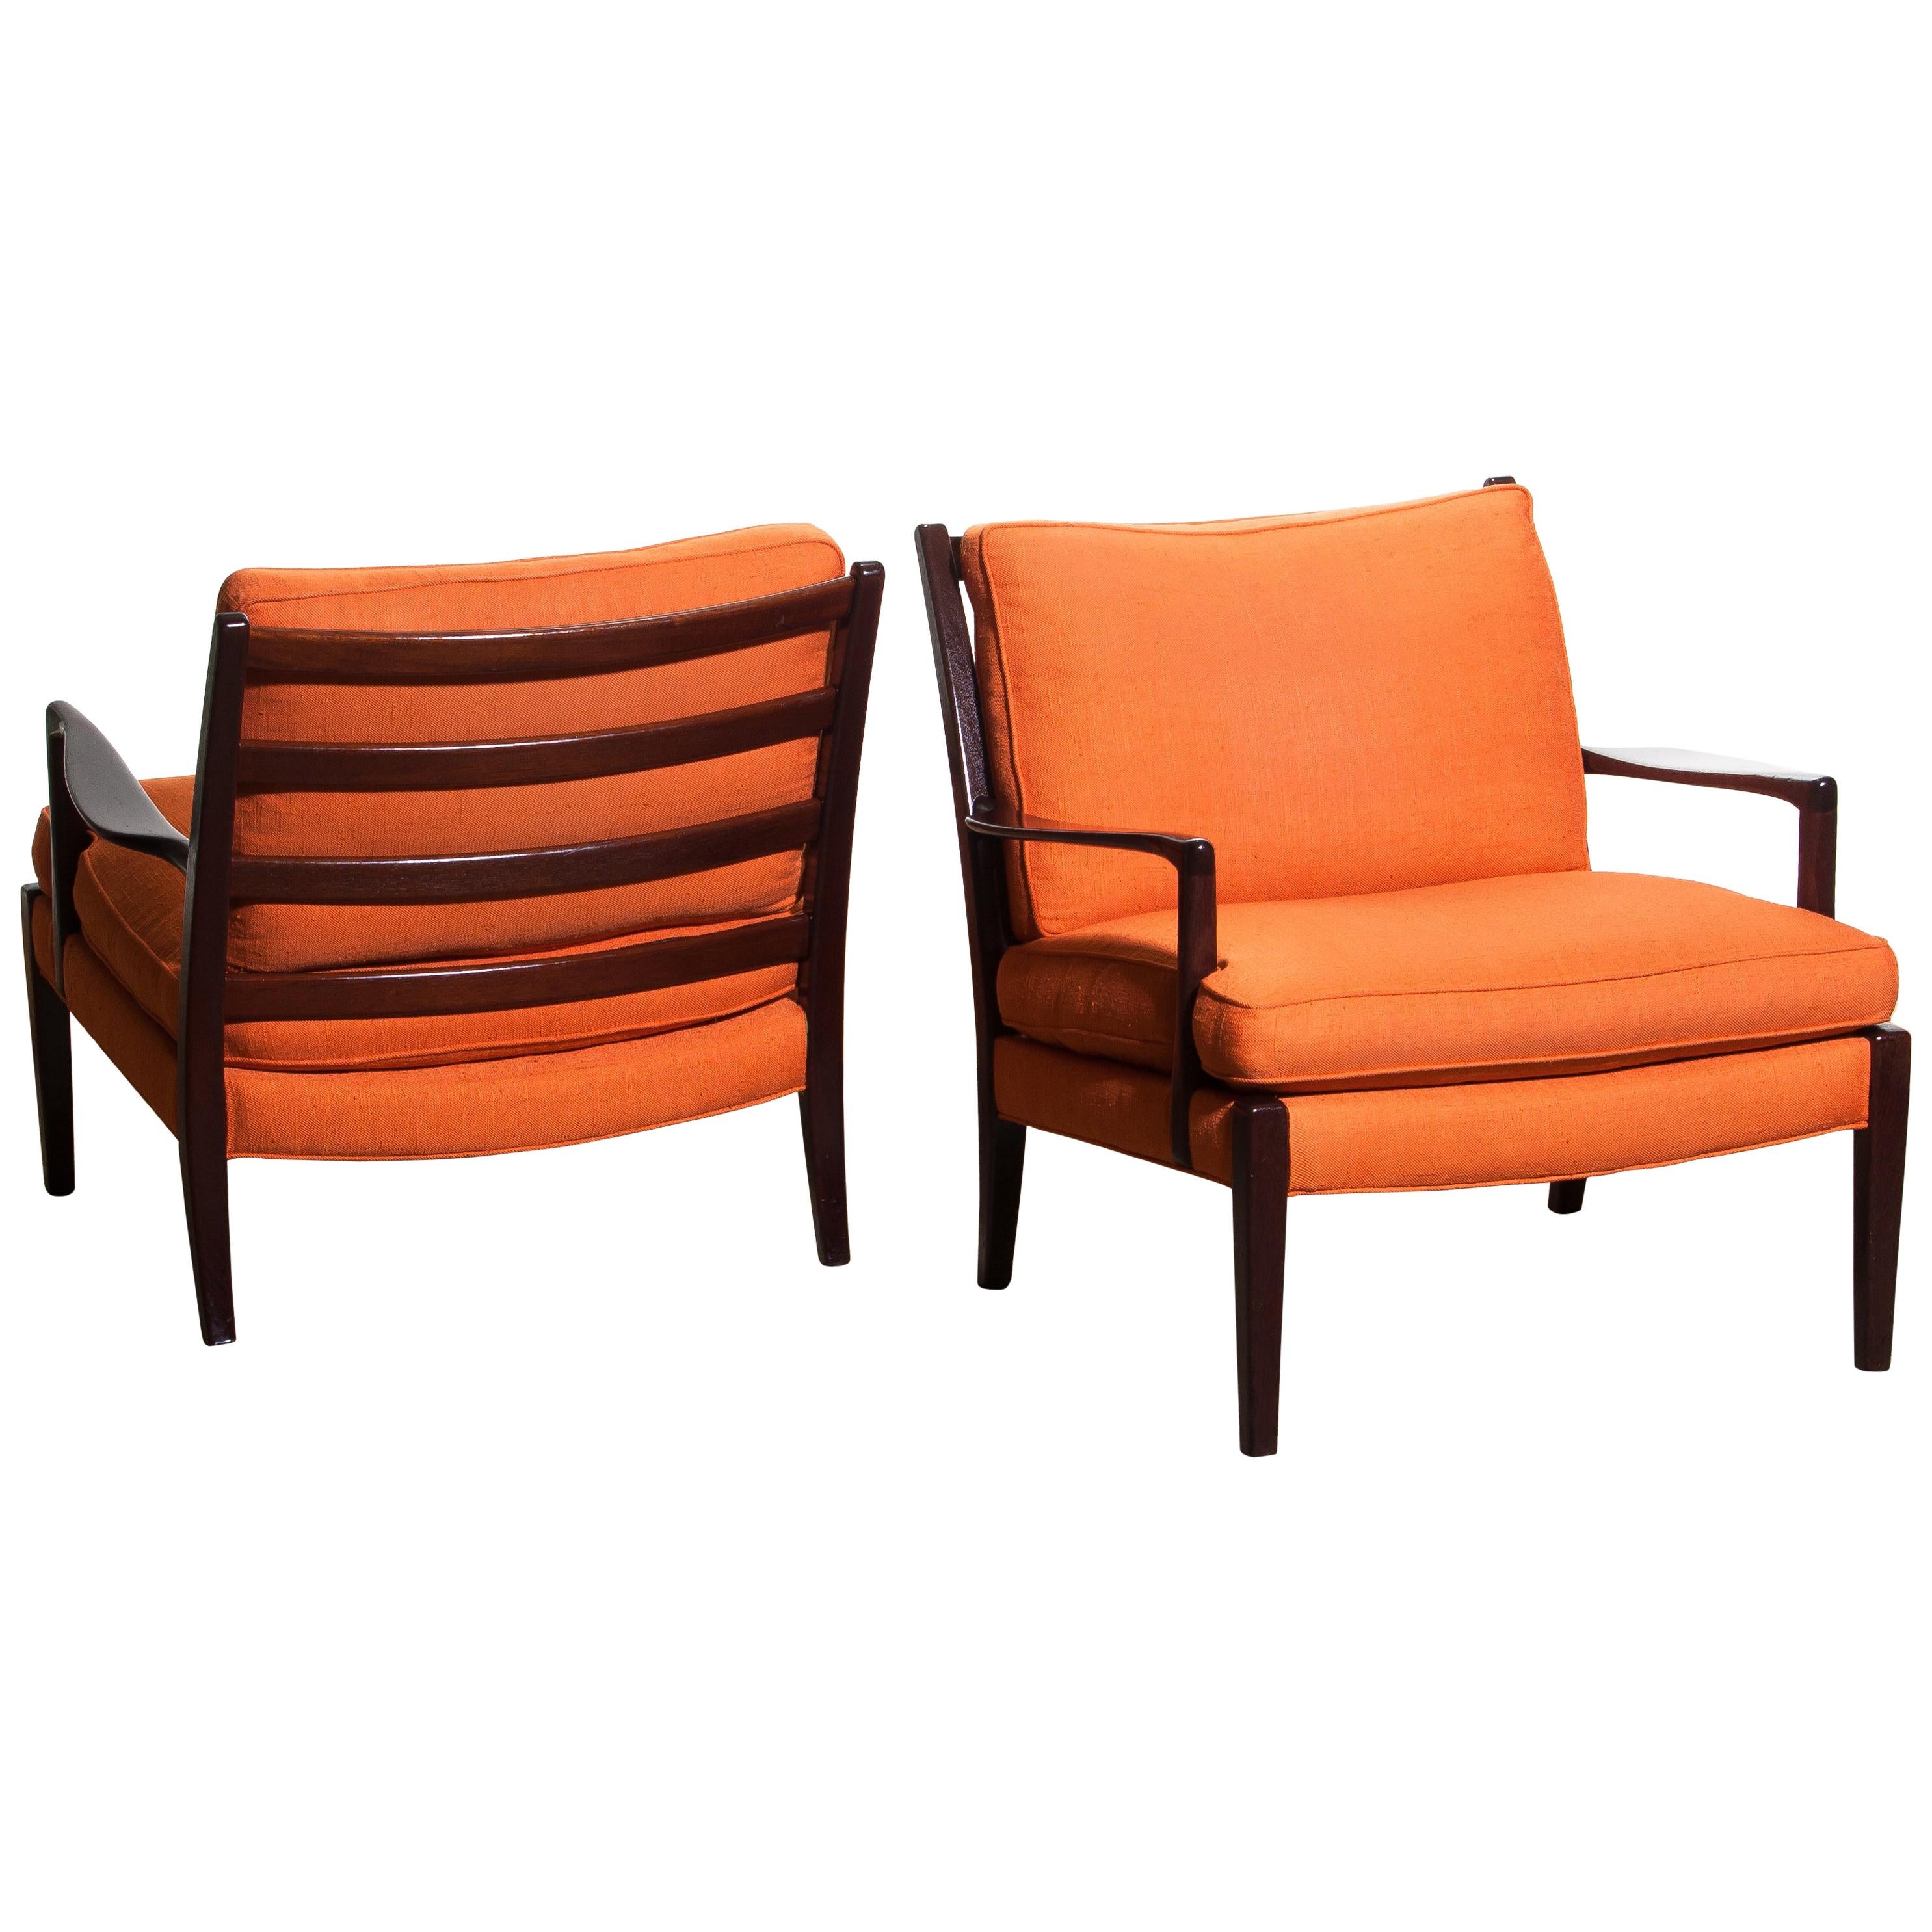 Beautiful set of two original orange colored linen easy / lounge chairs, model 